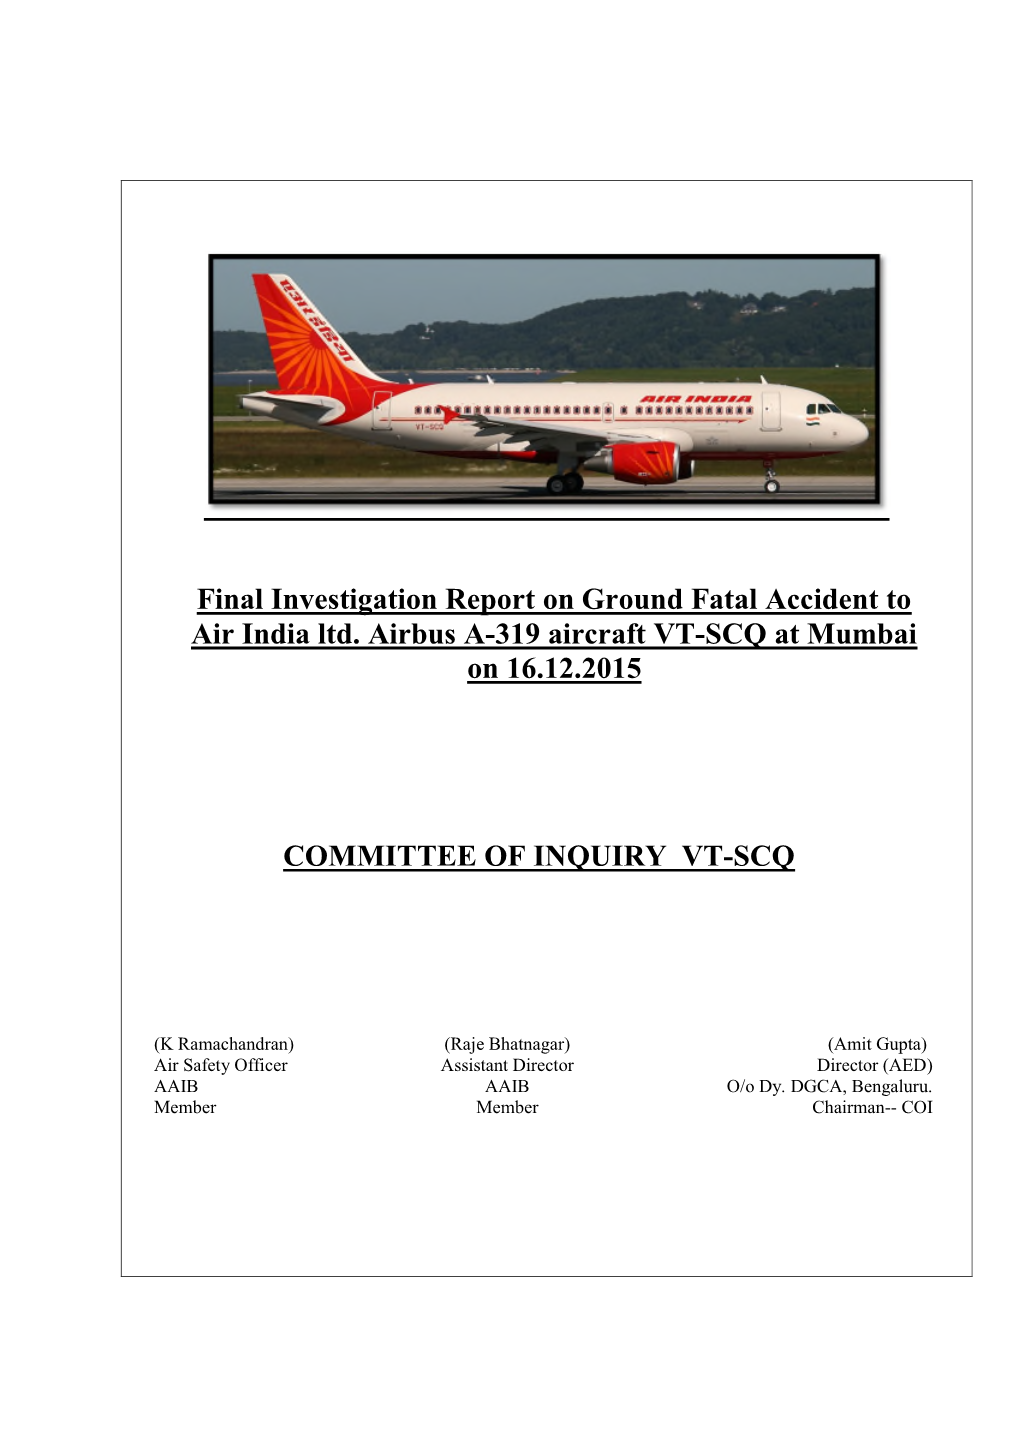 Final Investigation Report on Ground Fatal Accident to Air India Ltd. Airbus A-319 Aircraft VT-SCQ at Mumbai on 16.12.2015